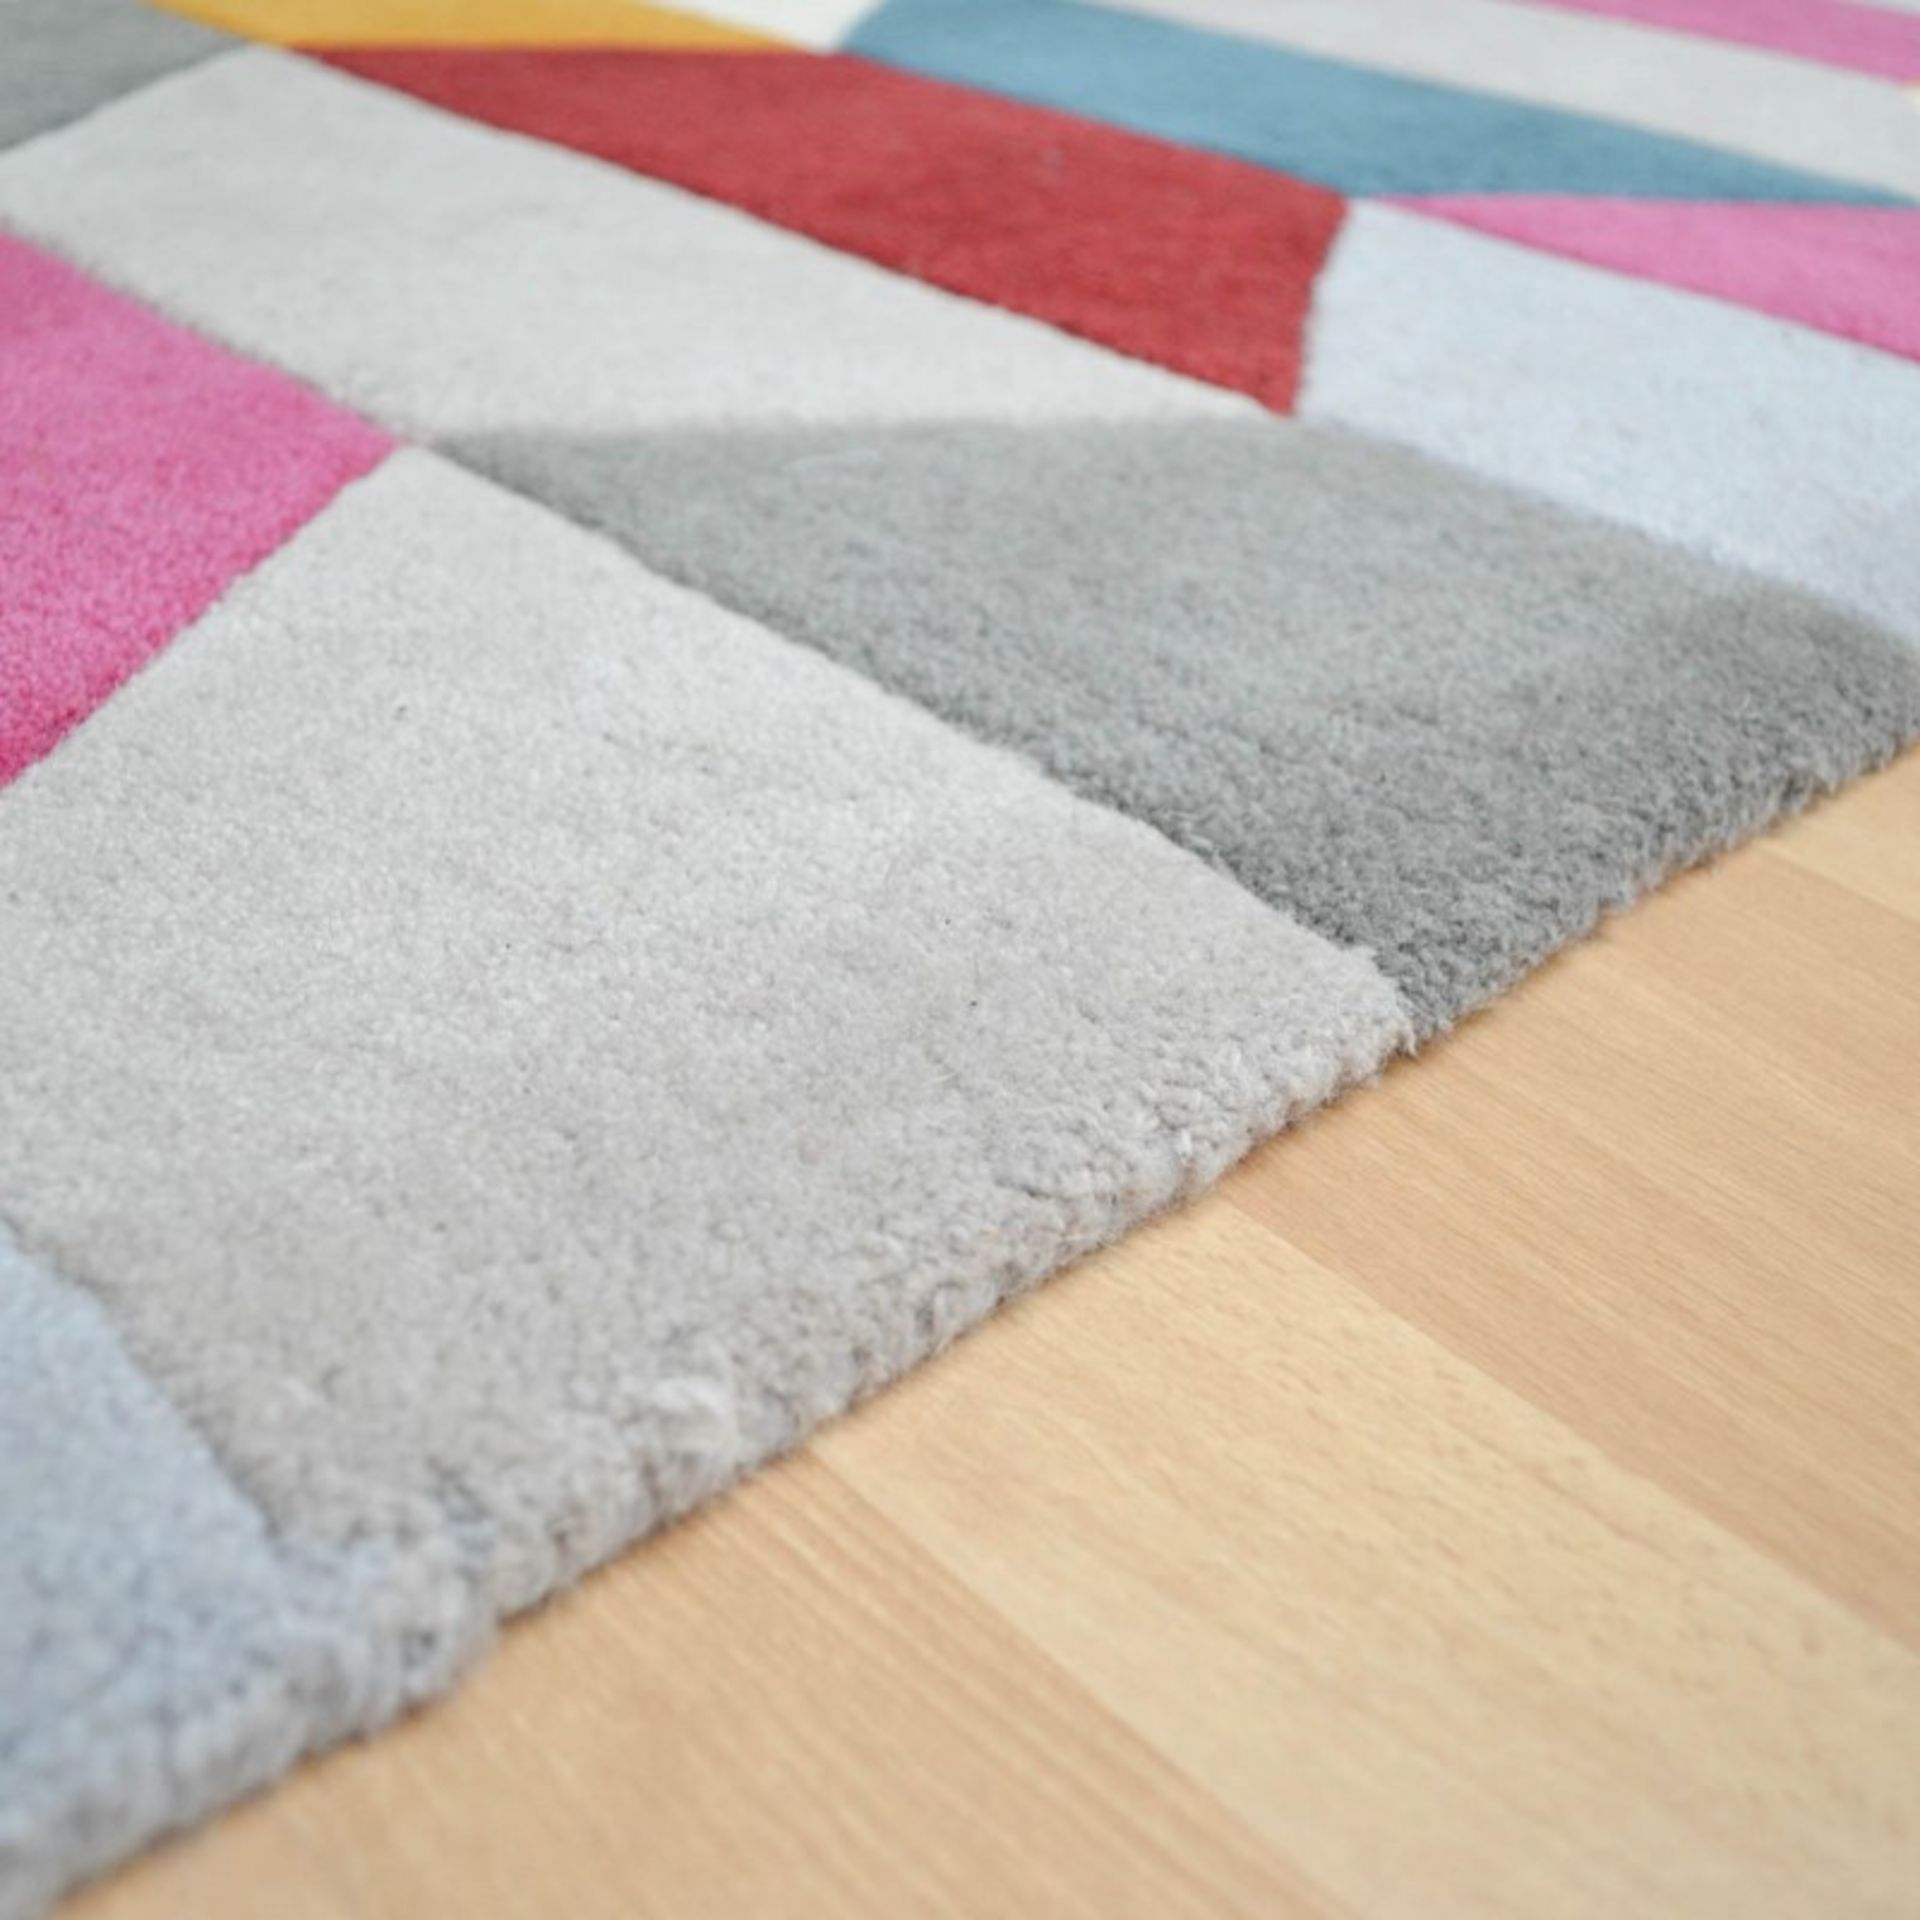 1 x Funk Honeycomb Bright Colourful Modern Hallway Runners - 100% New Zealand Wool - Handmade In - Image 3 of 6